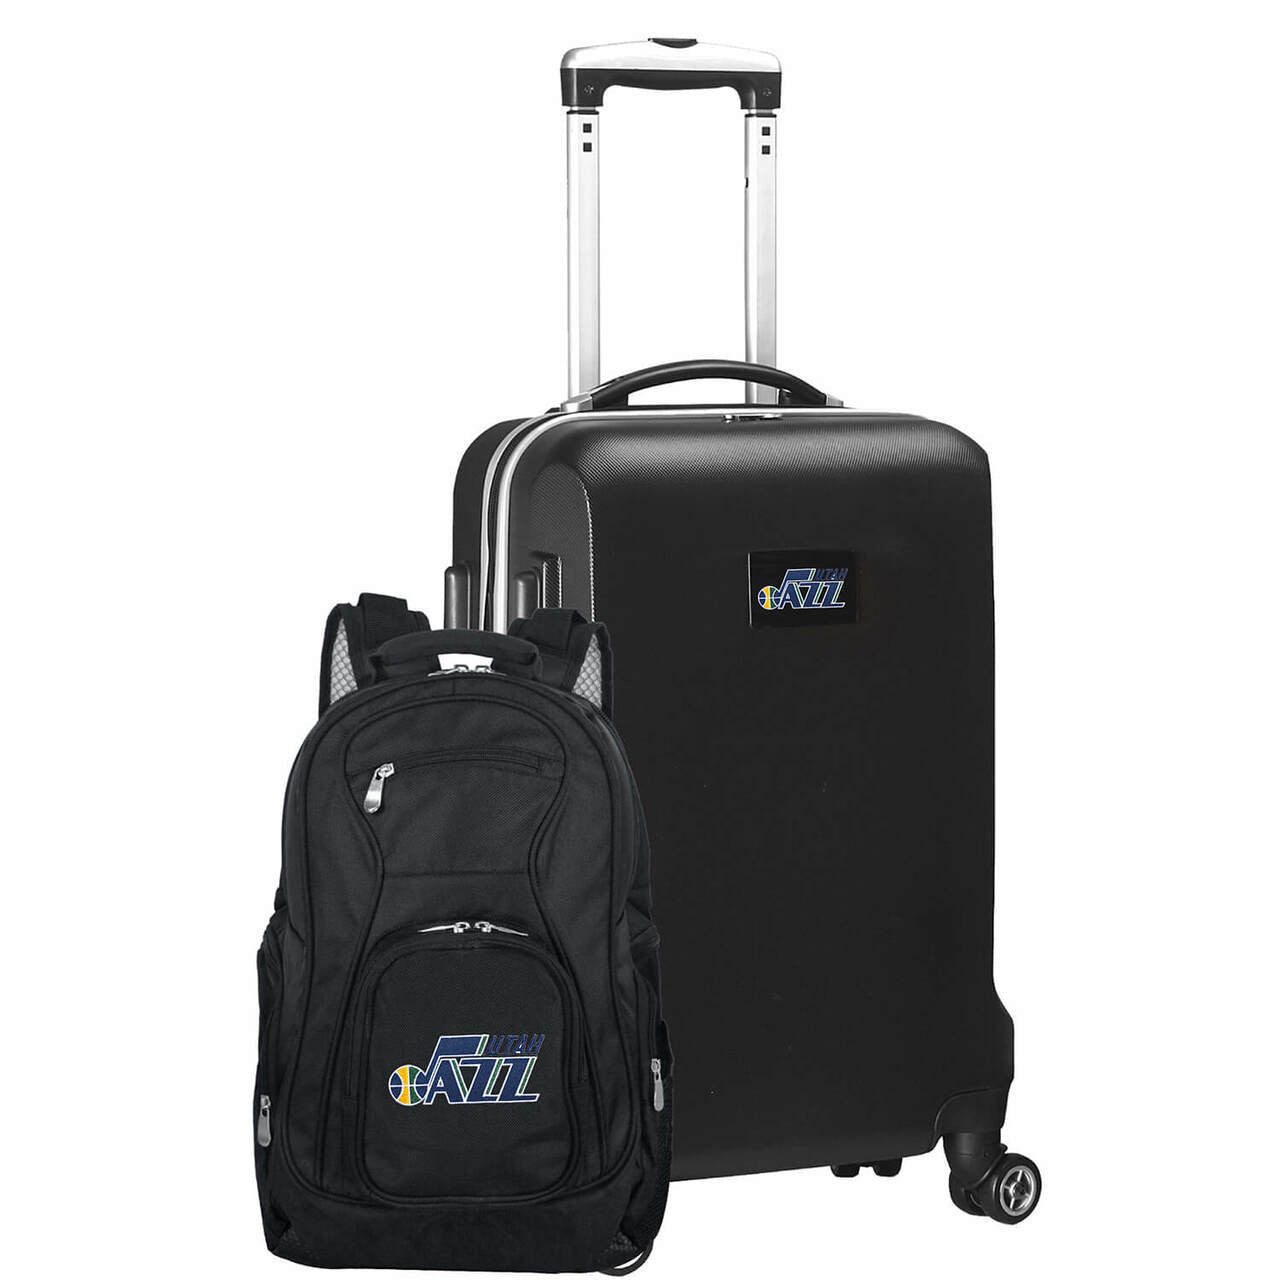 Utah Jazz Deluxe 2-Piece Backpack and Carry on Set in Black